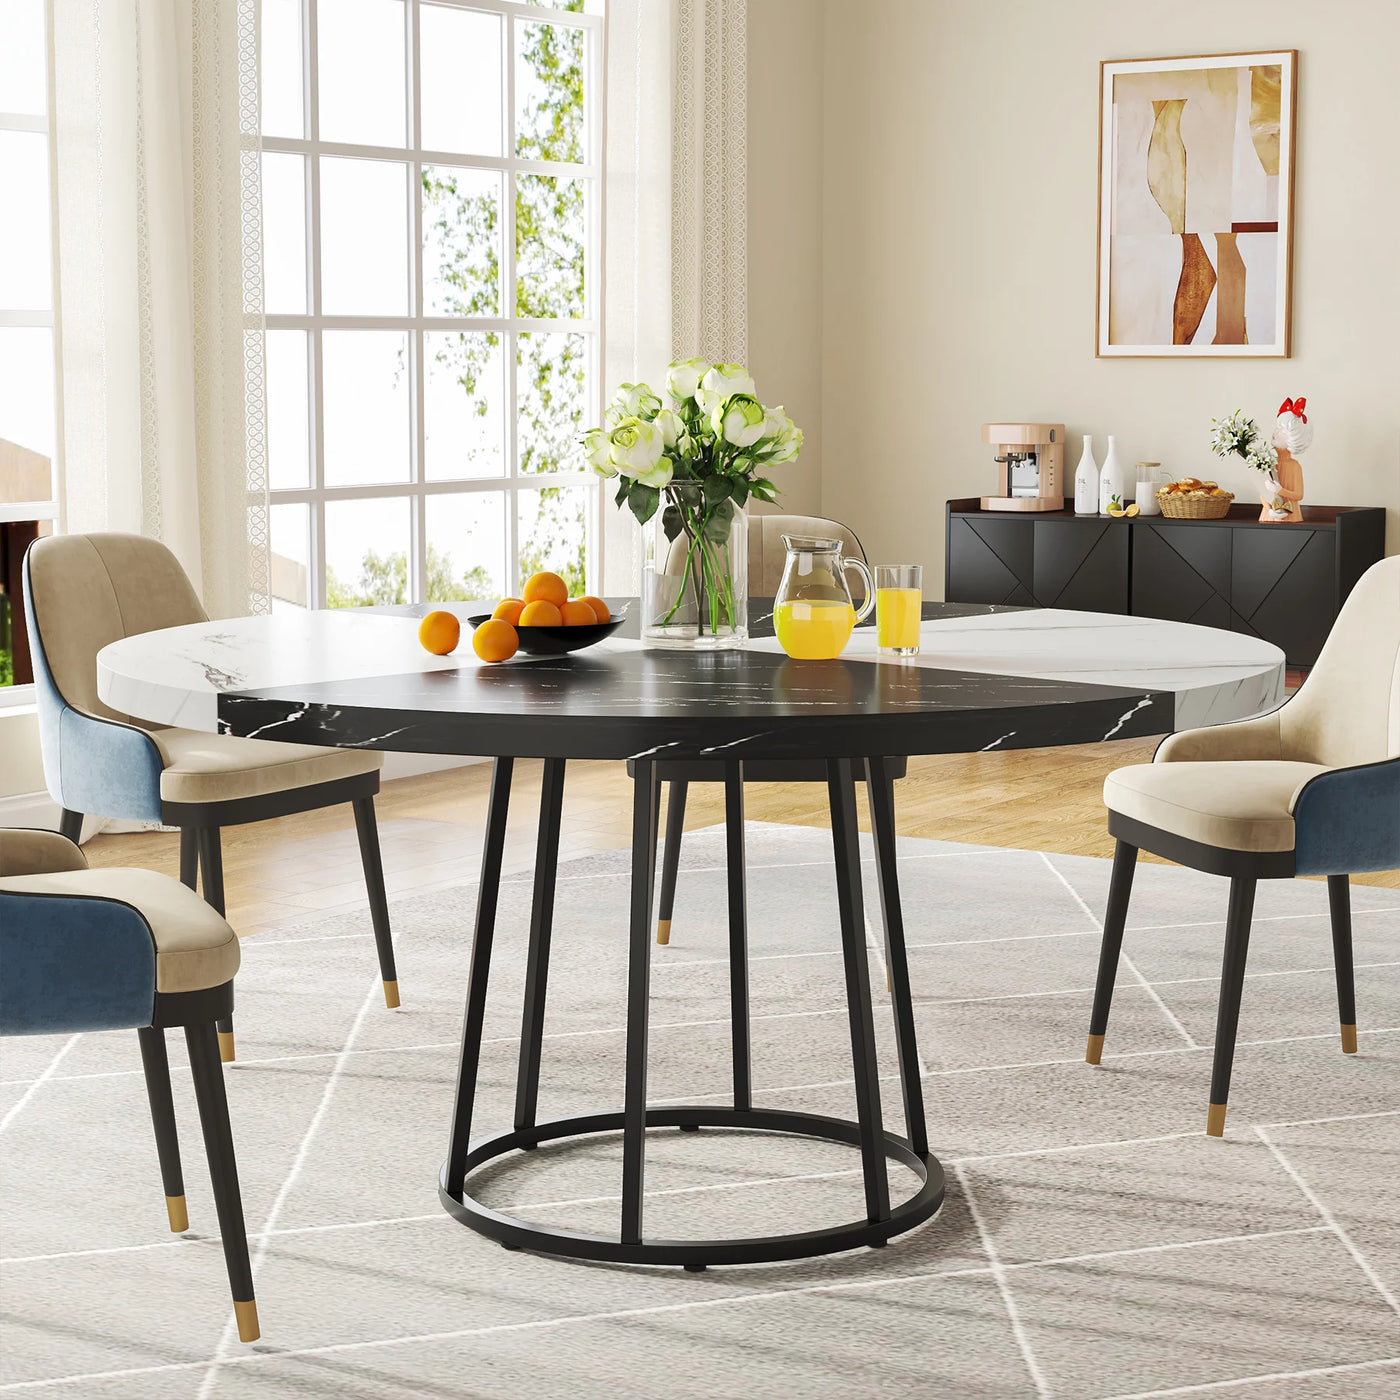 Cove Round Dining Table for 4 People | 47 inch Kitchen Table Large Dinner Table with Circle Metal Base Faux Marble